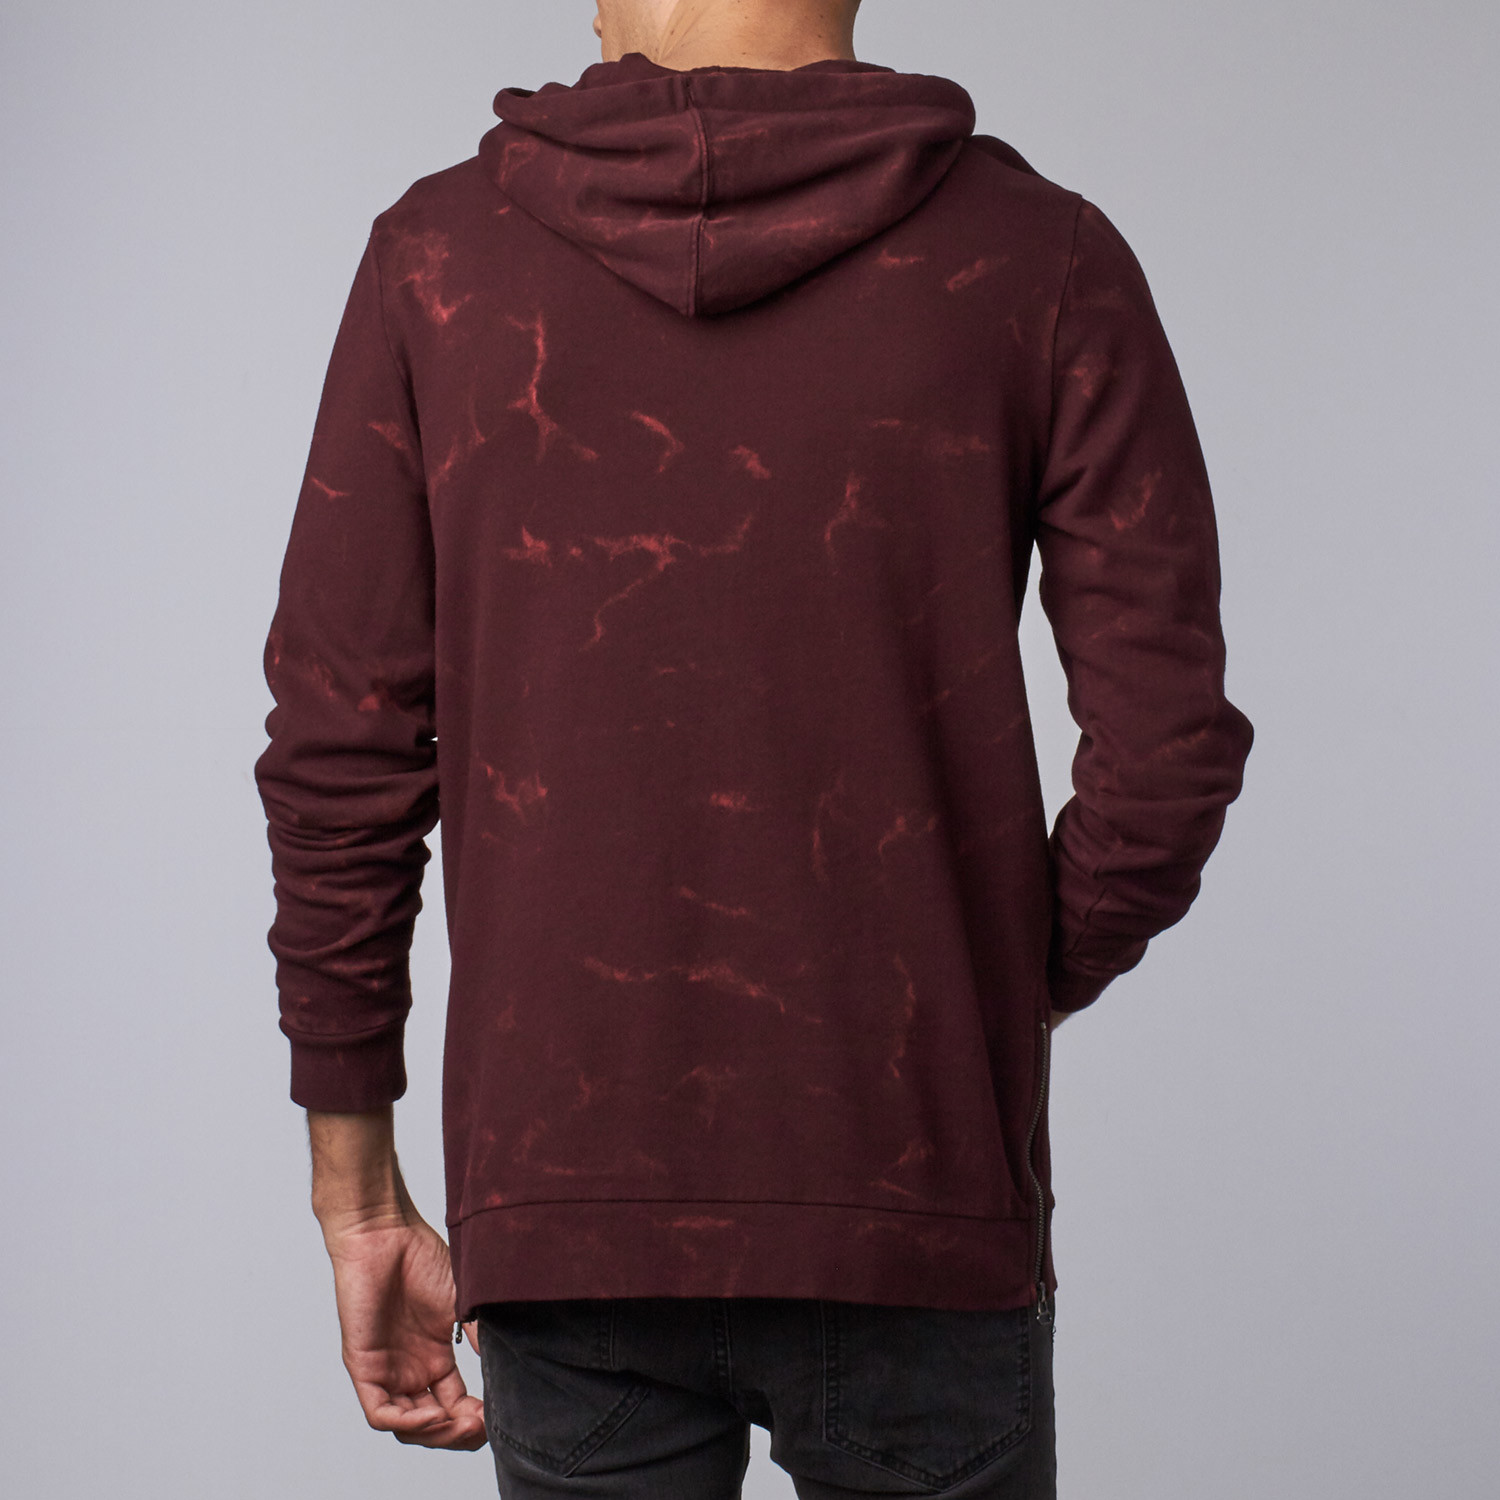 francisco-longline-acid-wash-hoodie-oxblood-red-xs-civil-society-touch-of-modern